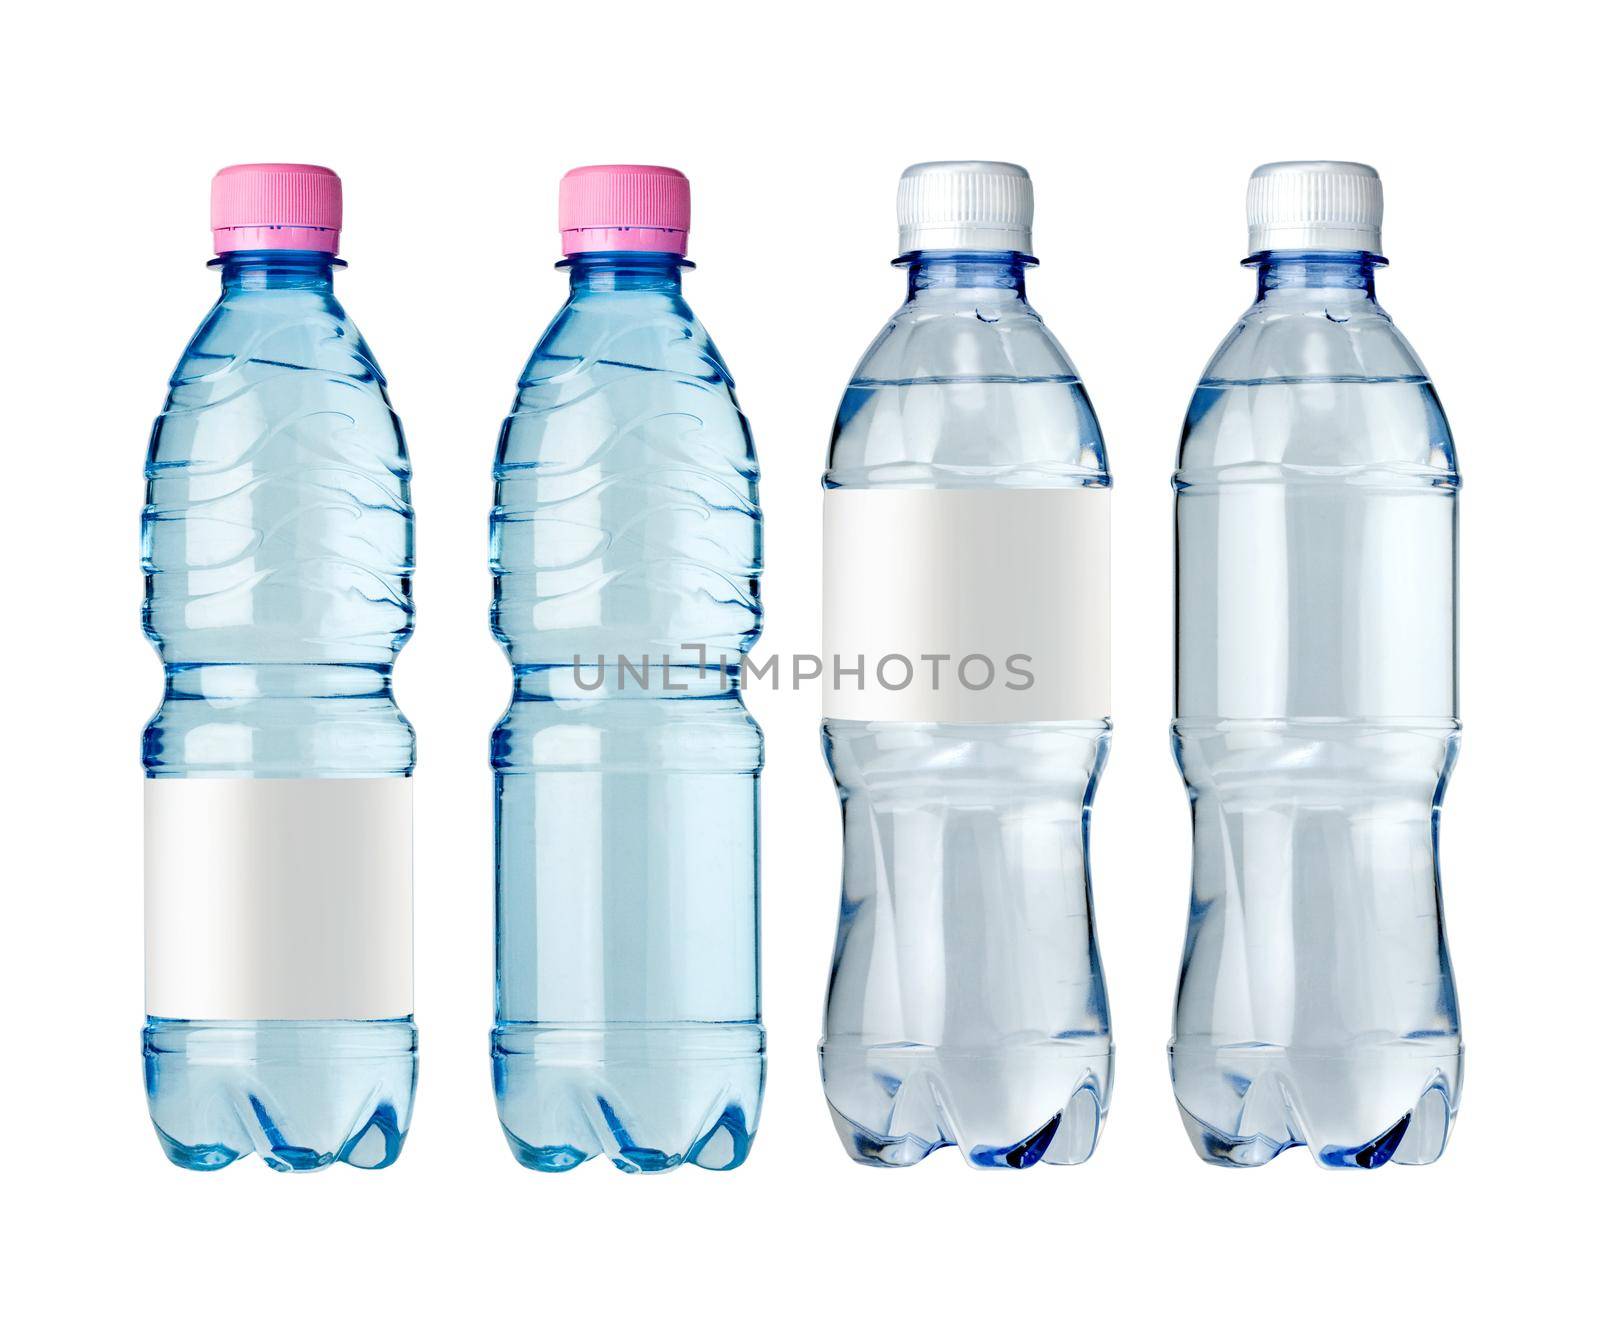  water bottles with blank label. Isolated on white